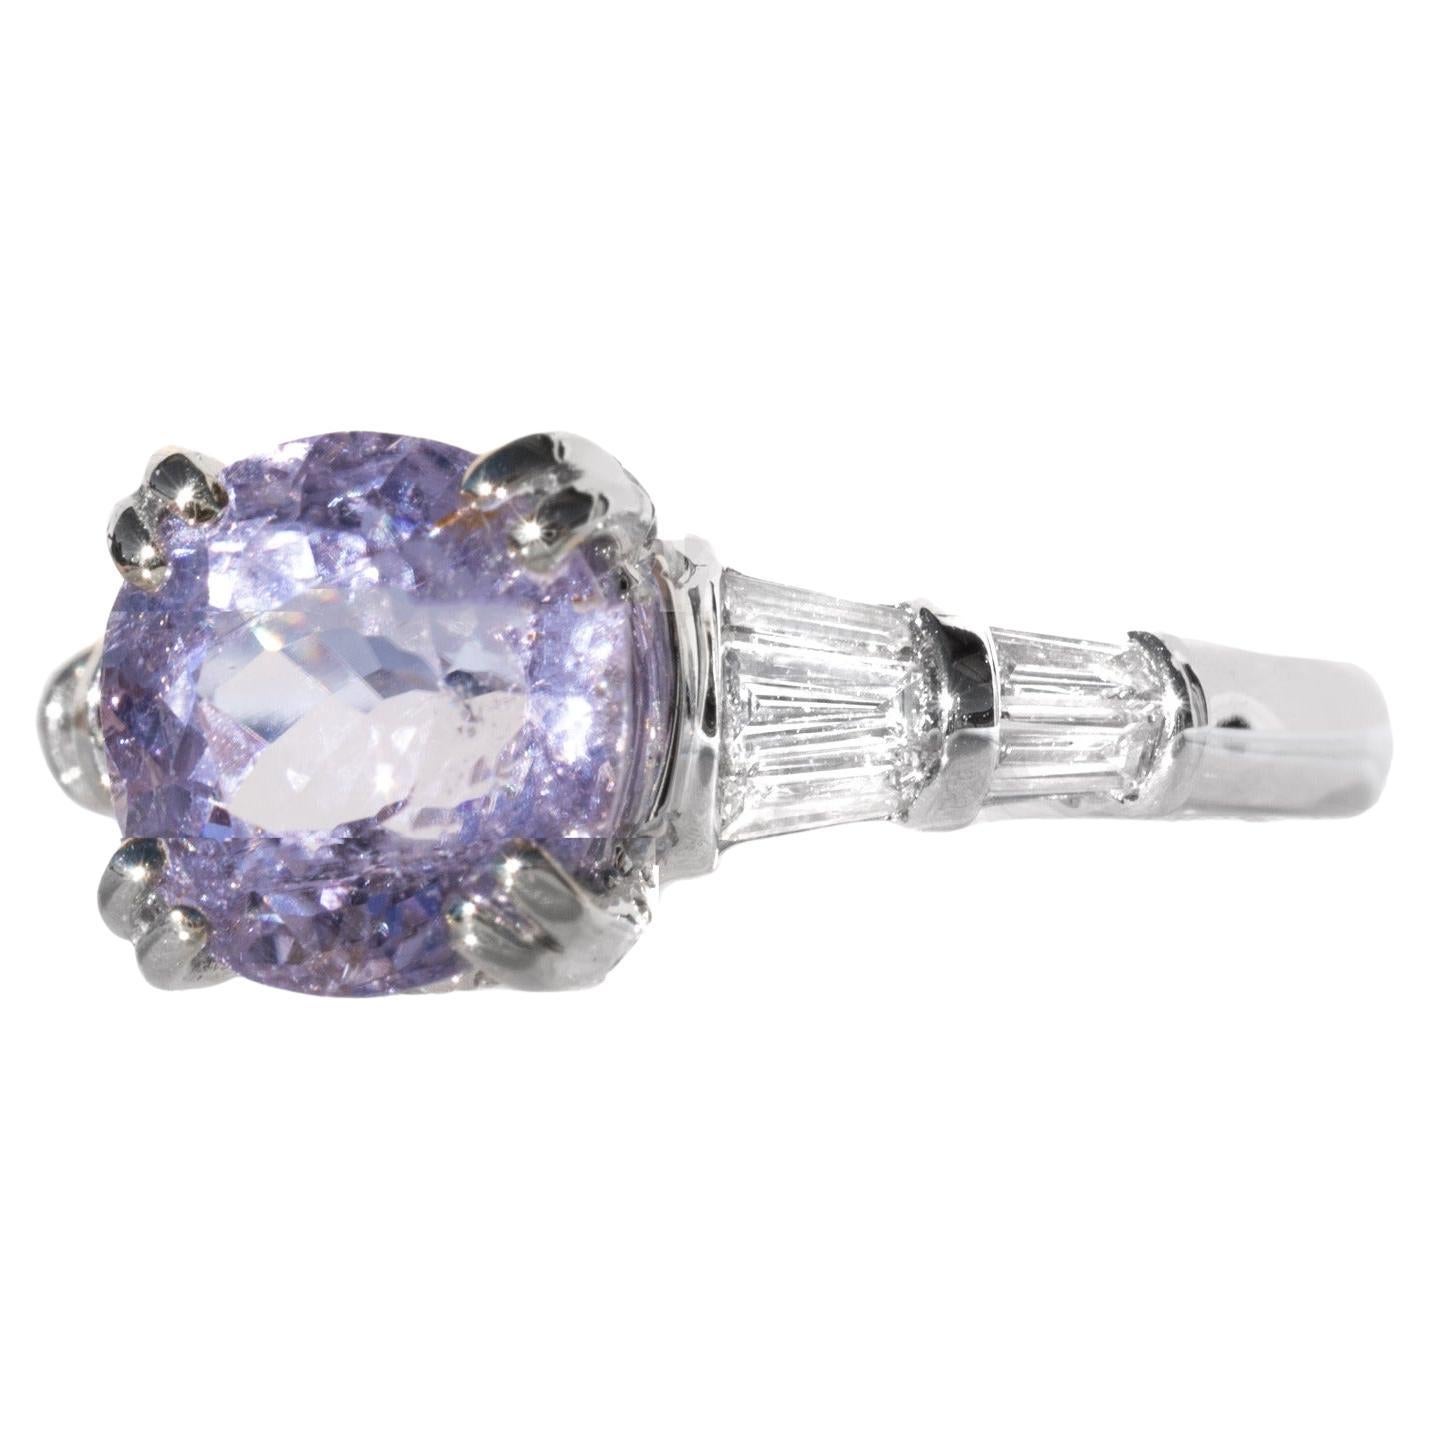 This is one of the rarest and most sought-after gemstones - and one of the most beautiful! This gemstone is a beautiful lavender sapphire. The color is exceptional, with hot pink sparkle. We put this ring in one of our most stunning designer